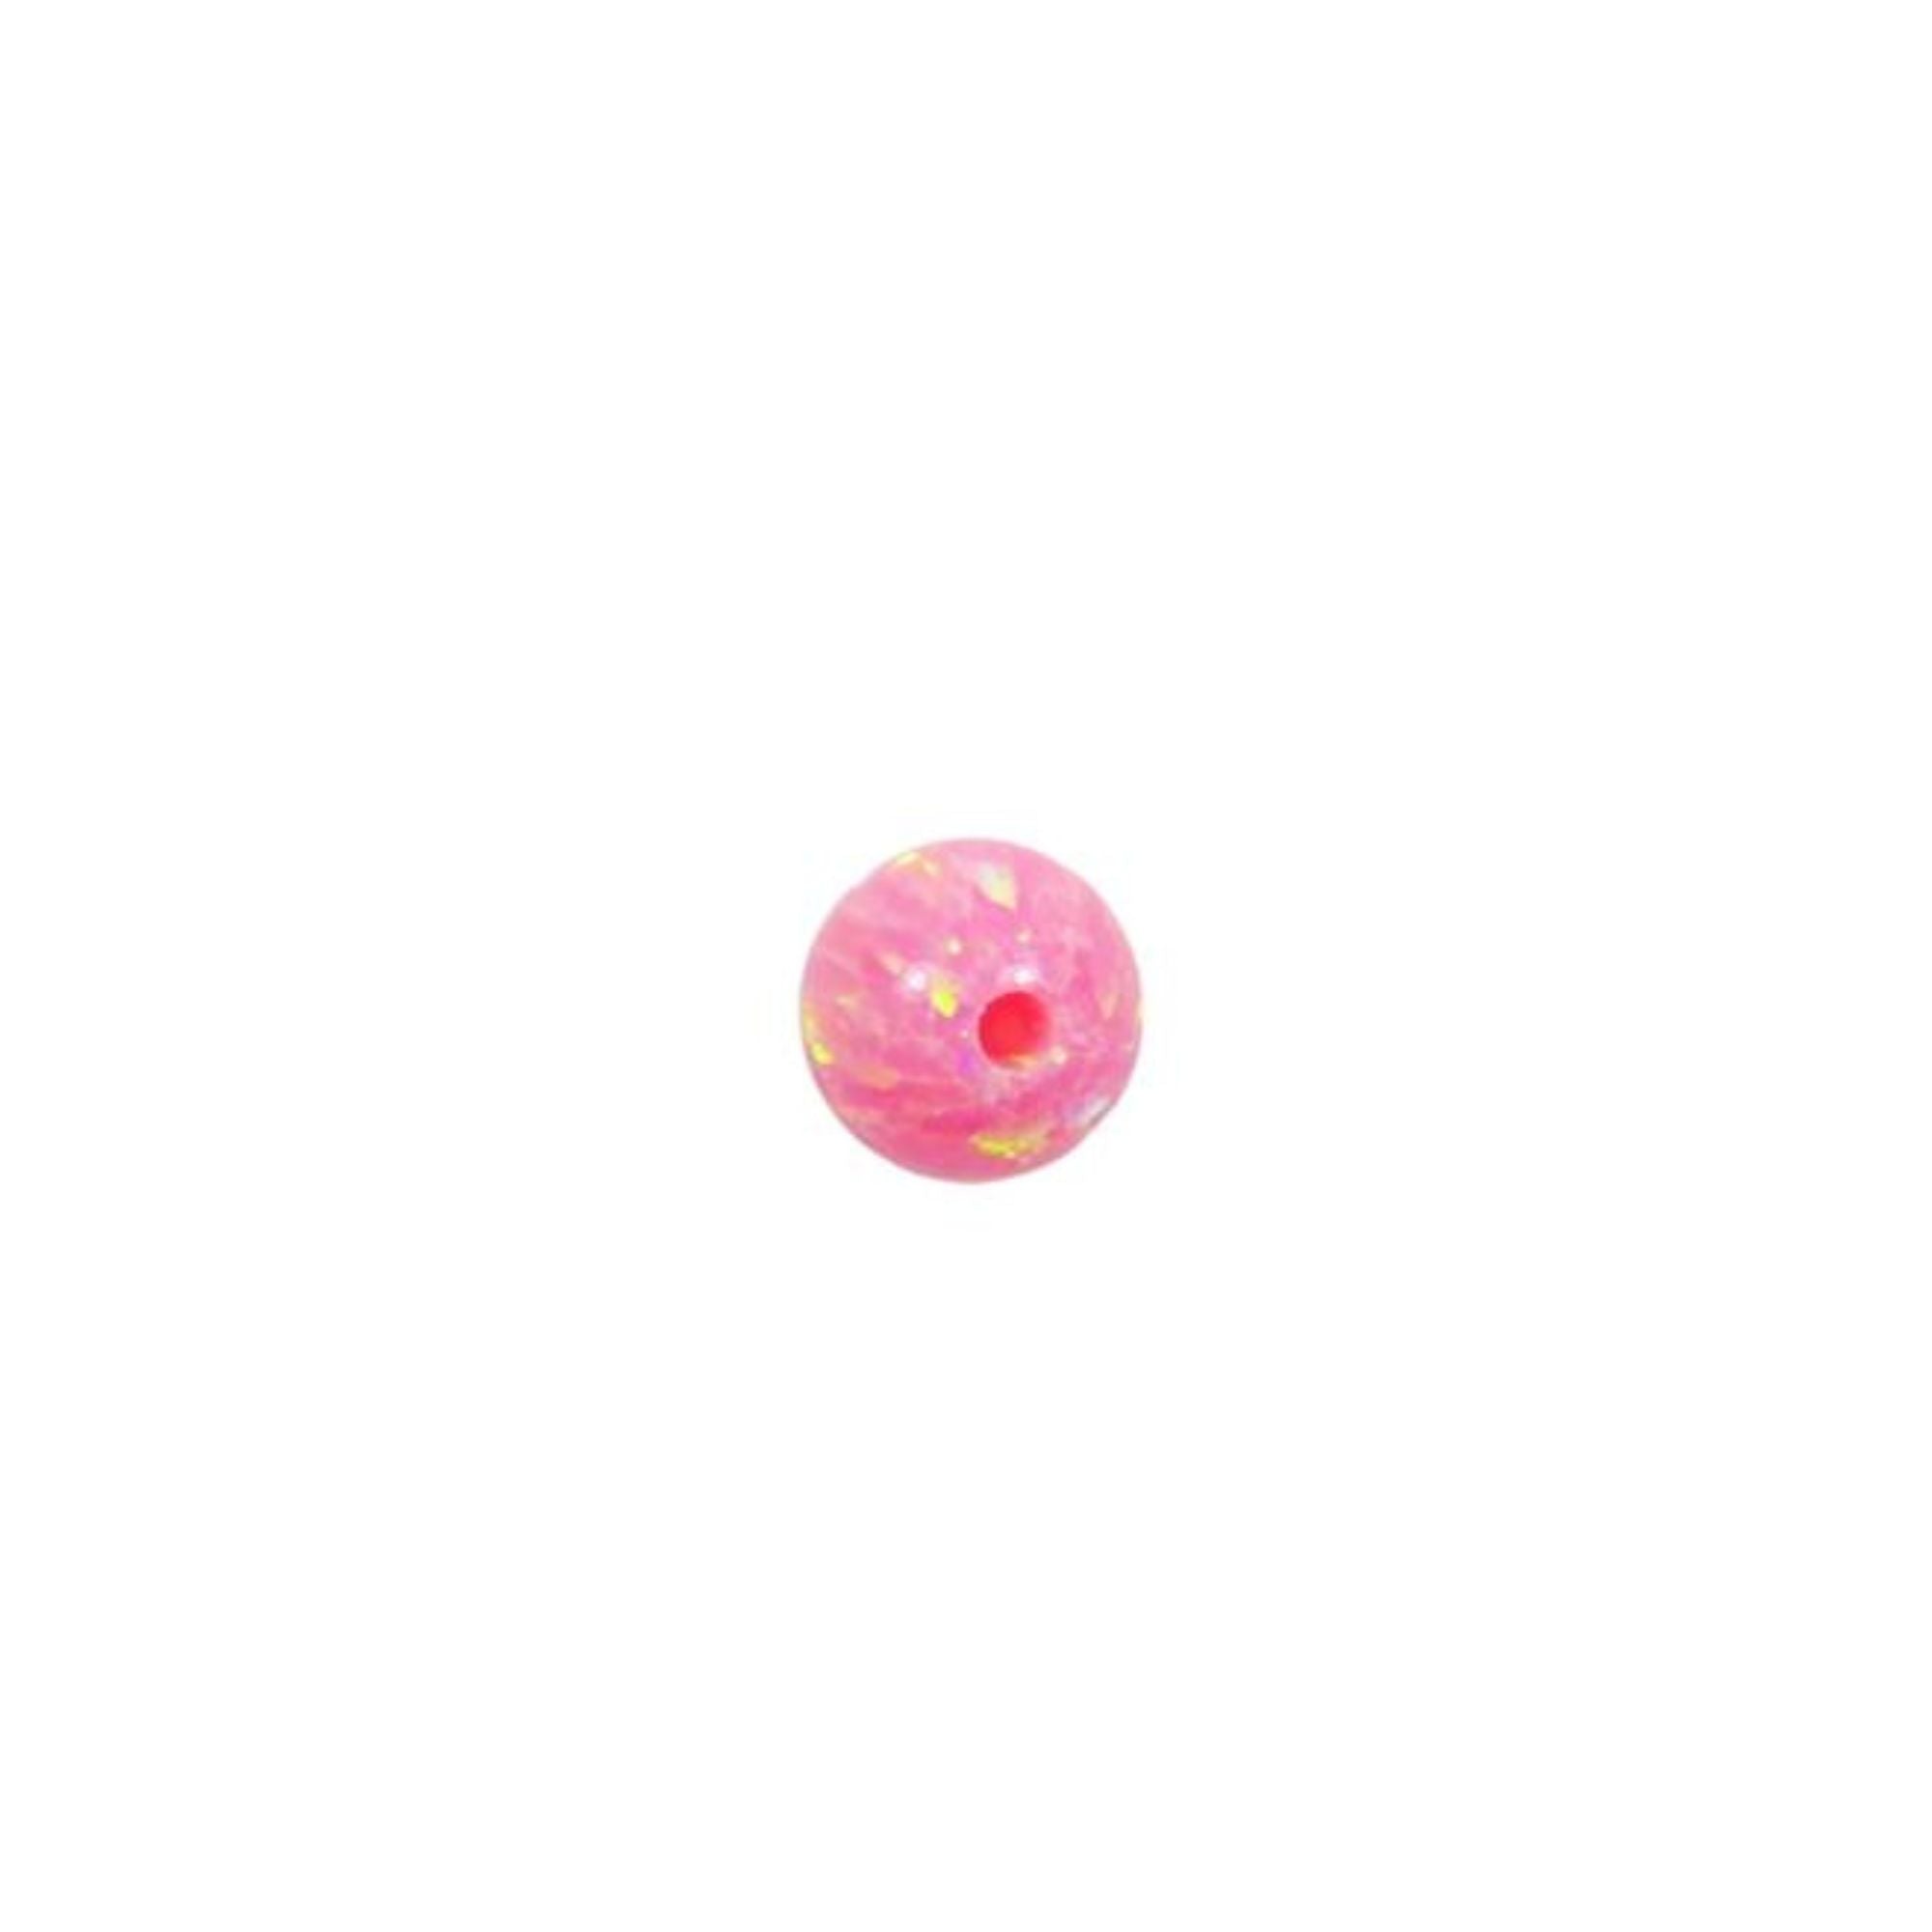 Opal Round Beads 5mm. Wholesale Ball Dot Pendant Charm, Full drilled Hole